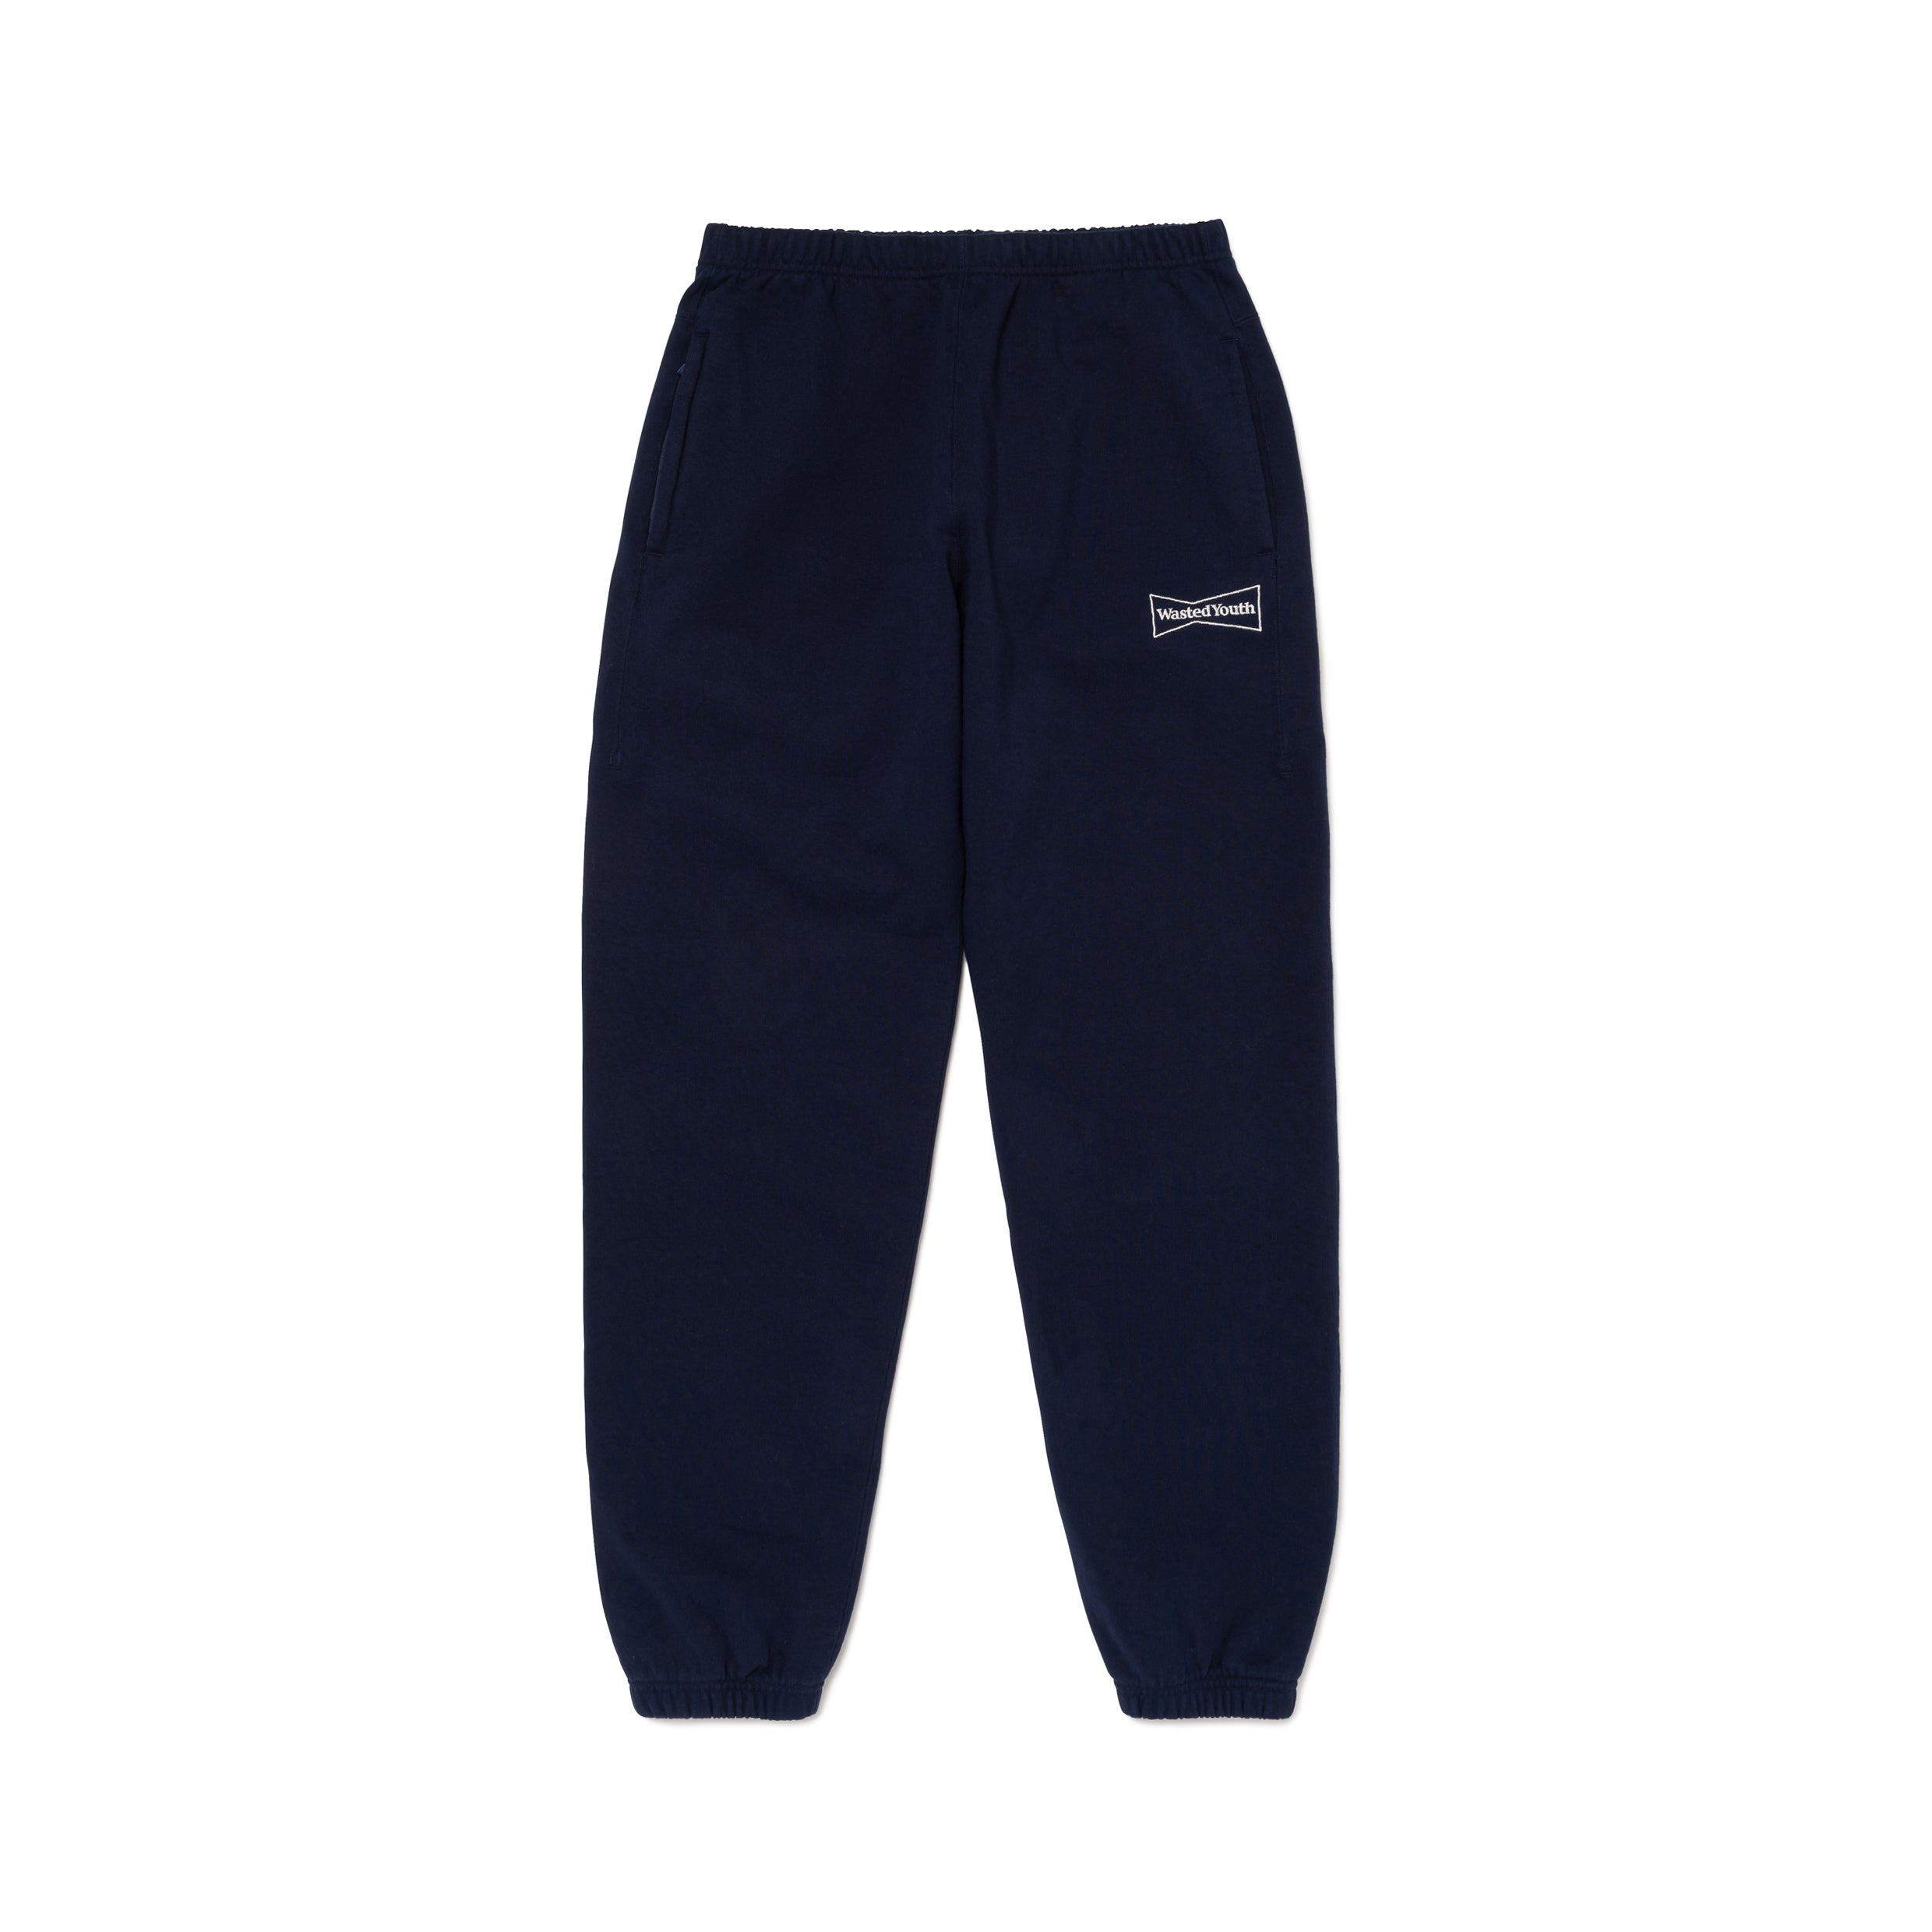 SWEAT PANTS – HUMAN MADE ONLINE STORE